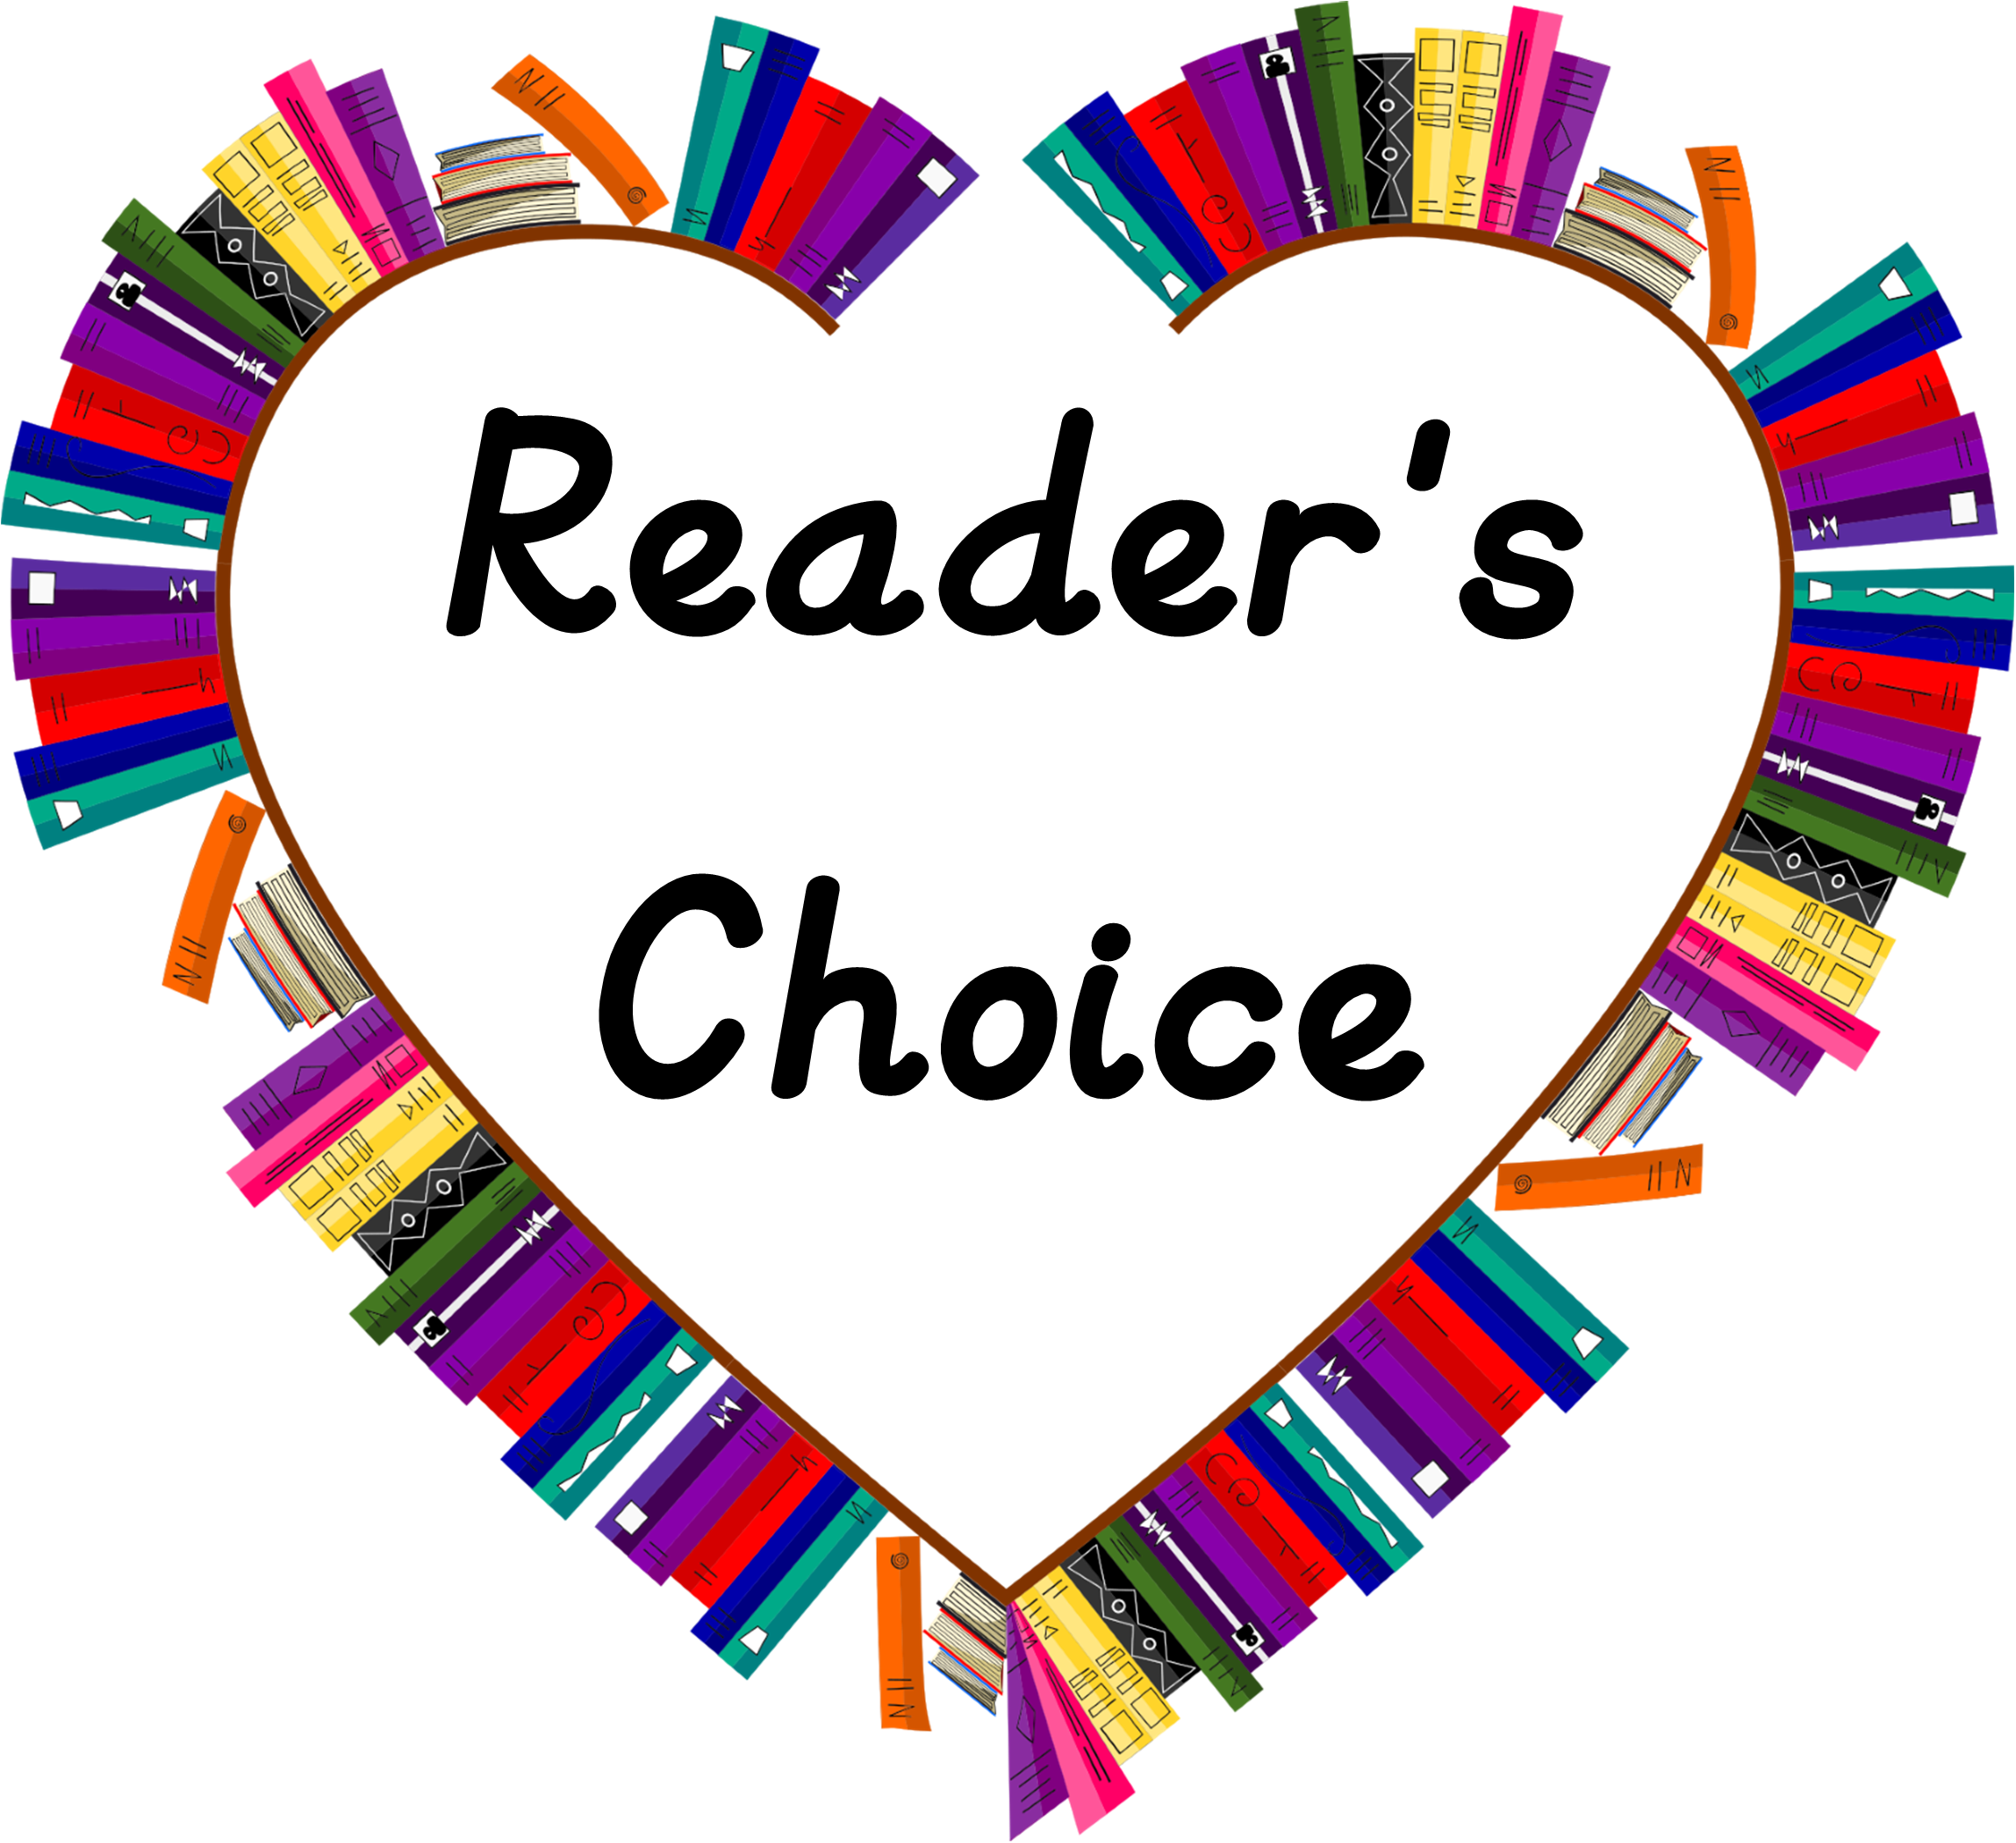 Illustration of books on shelves in the shape of a heart with the words Reader's Choice written in the middle